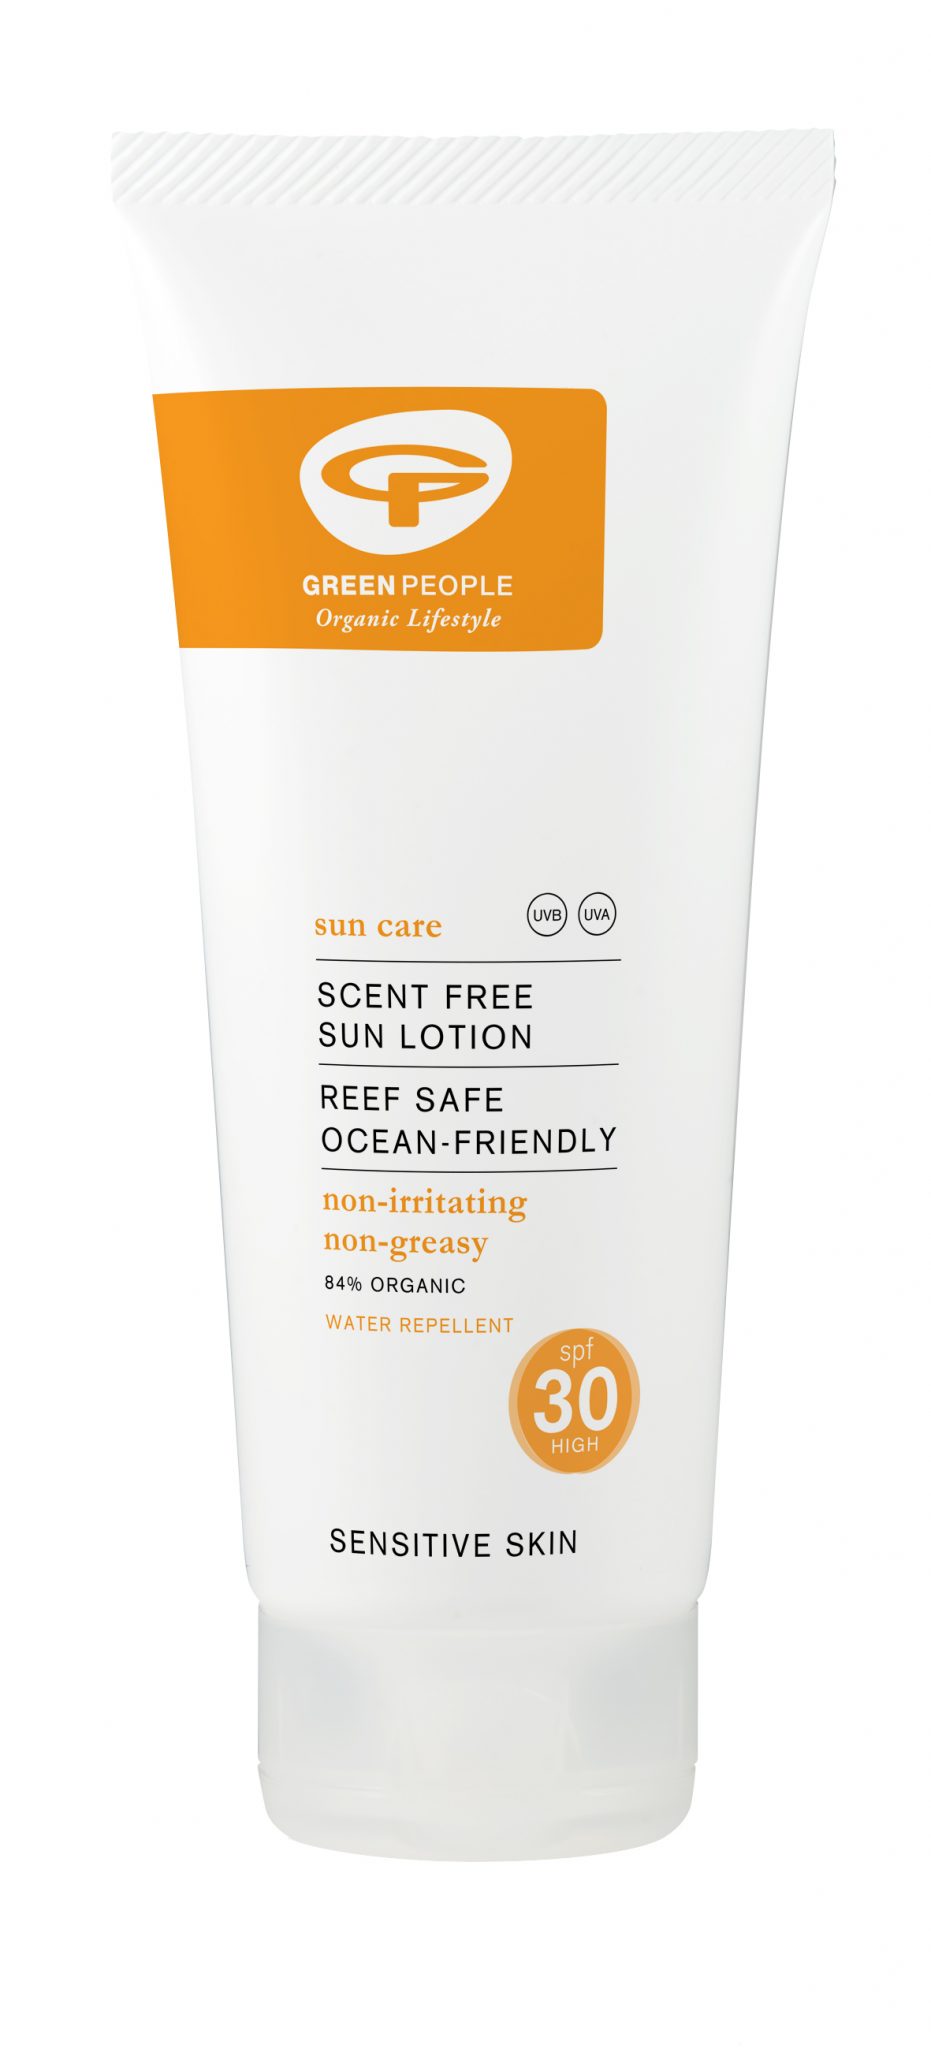 eco friendly reef safe sunscreen